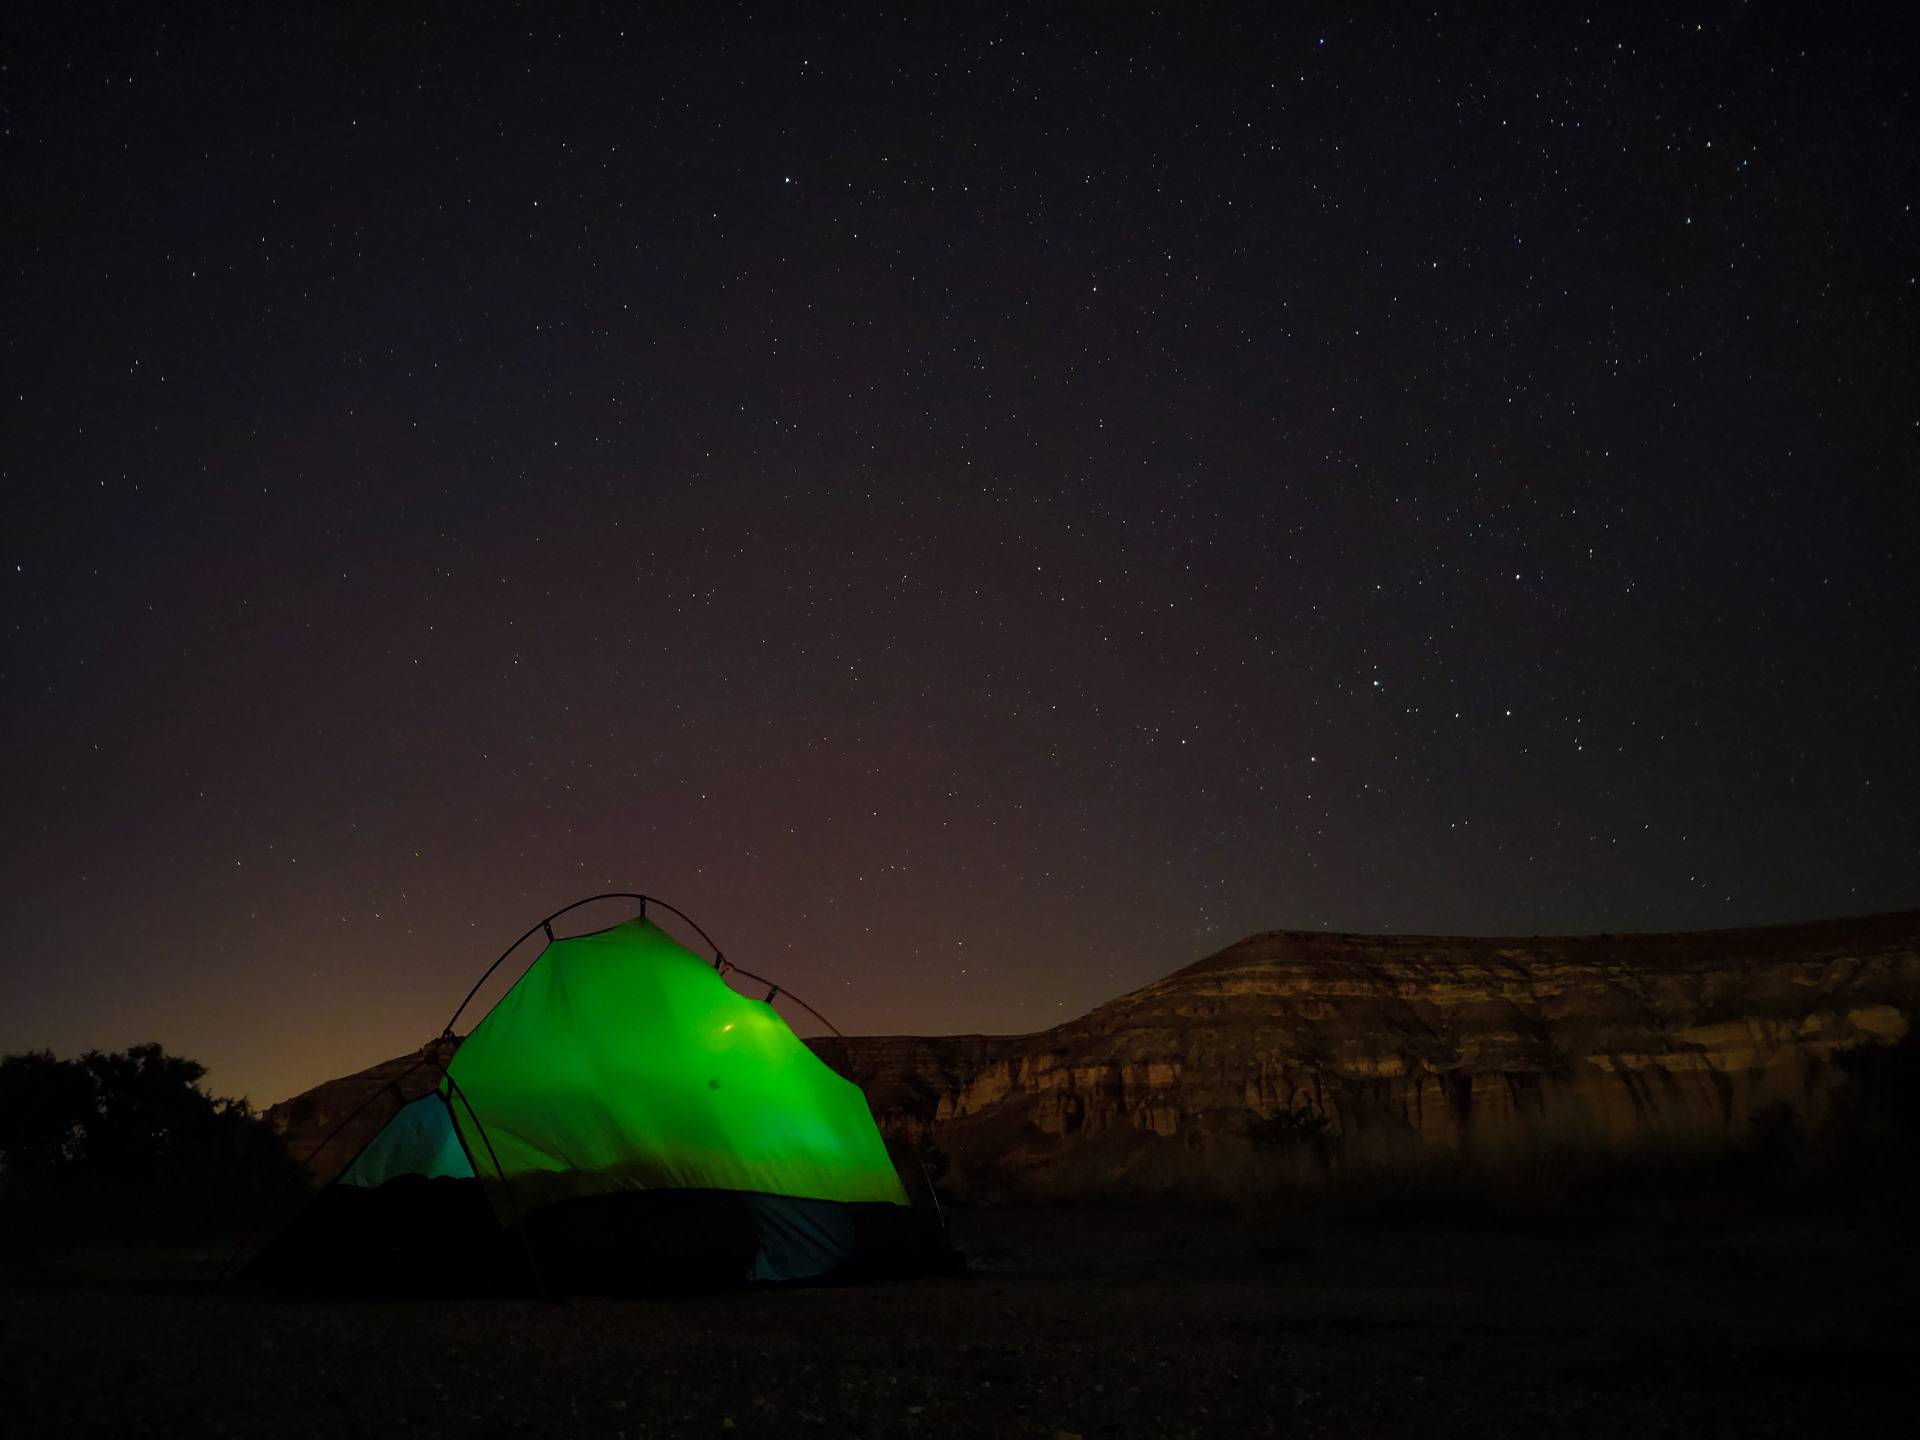 Our tent at night. Photo by Wander Spot Explore ©